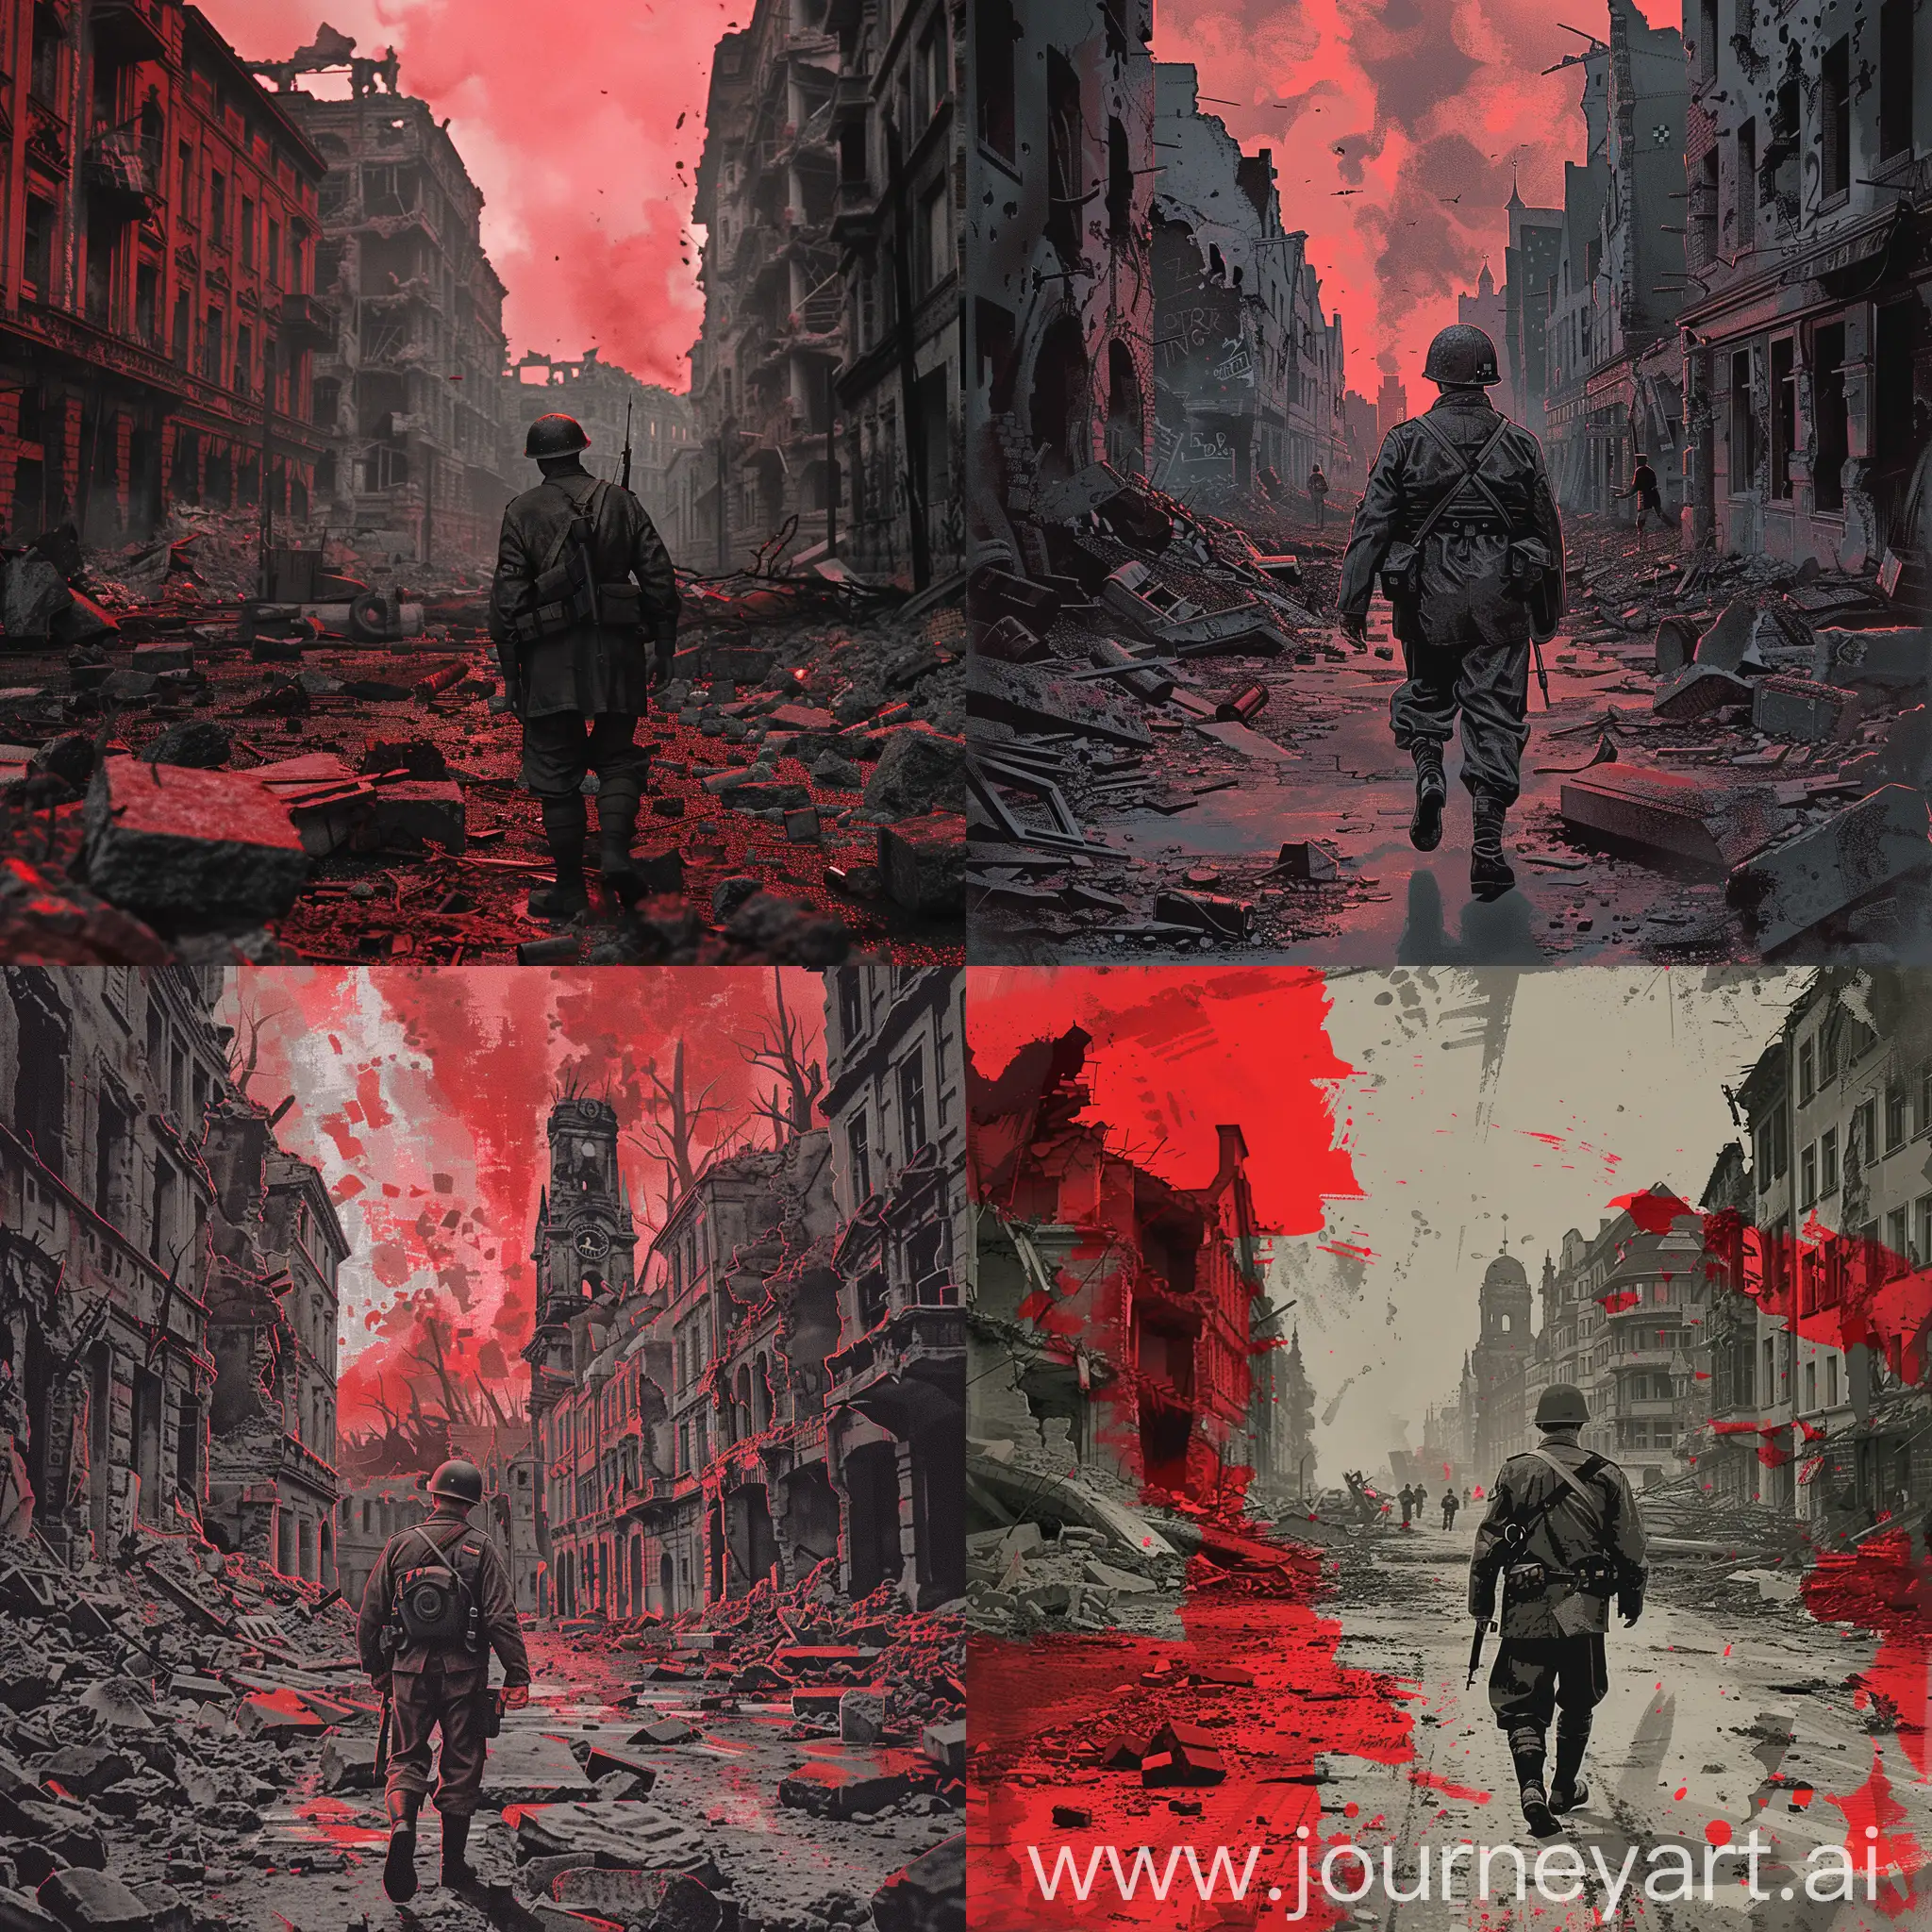 Show a German soldier walking through the ruined streets of Germany from the WW2 era, using red and gray colors to show the scary and sad atmosphere in the picture.